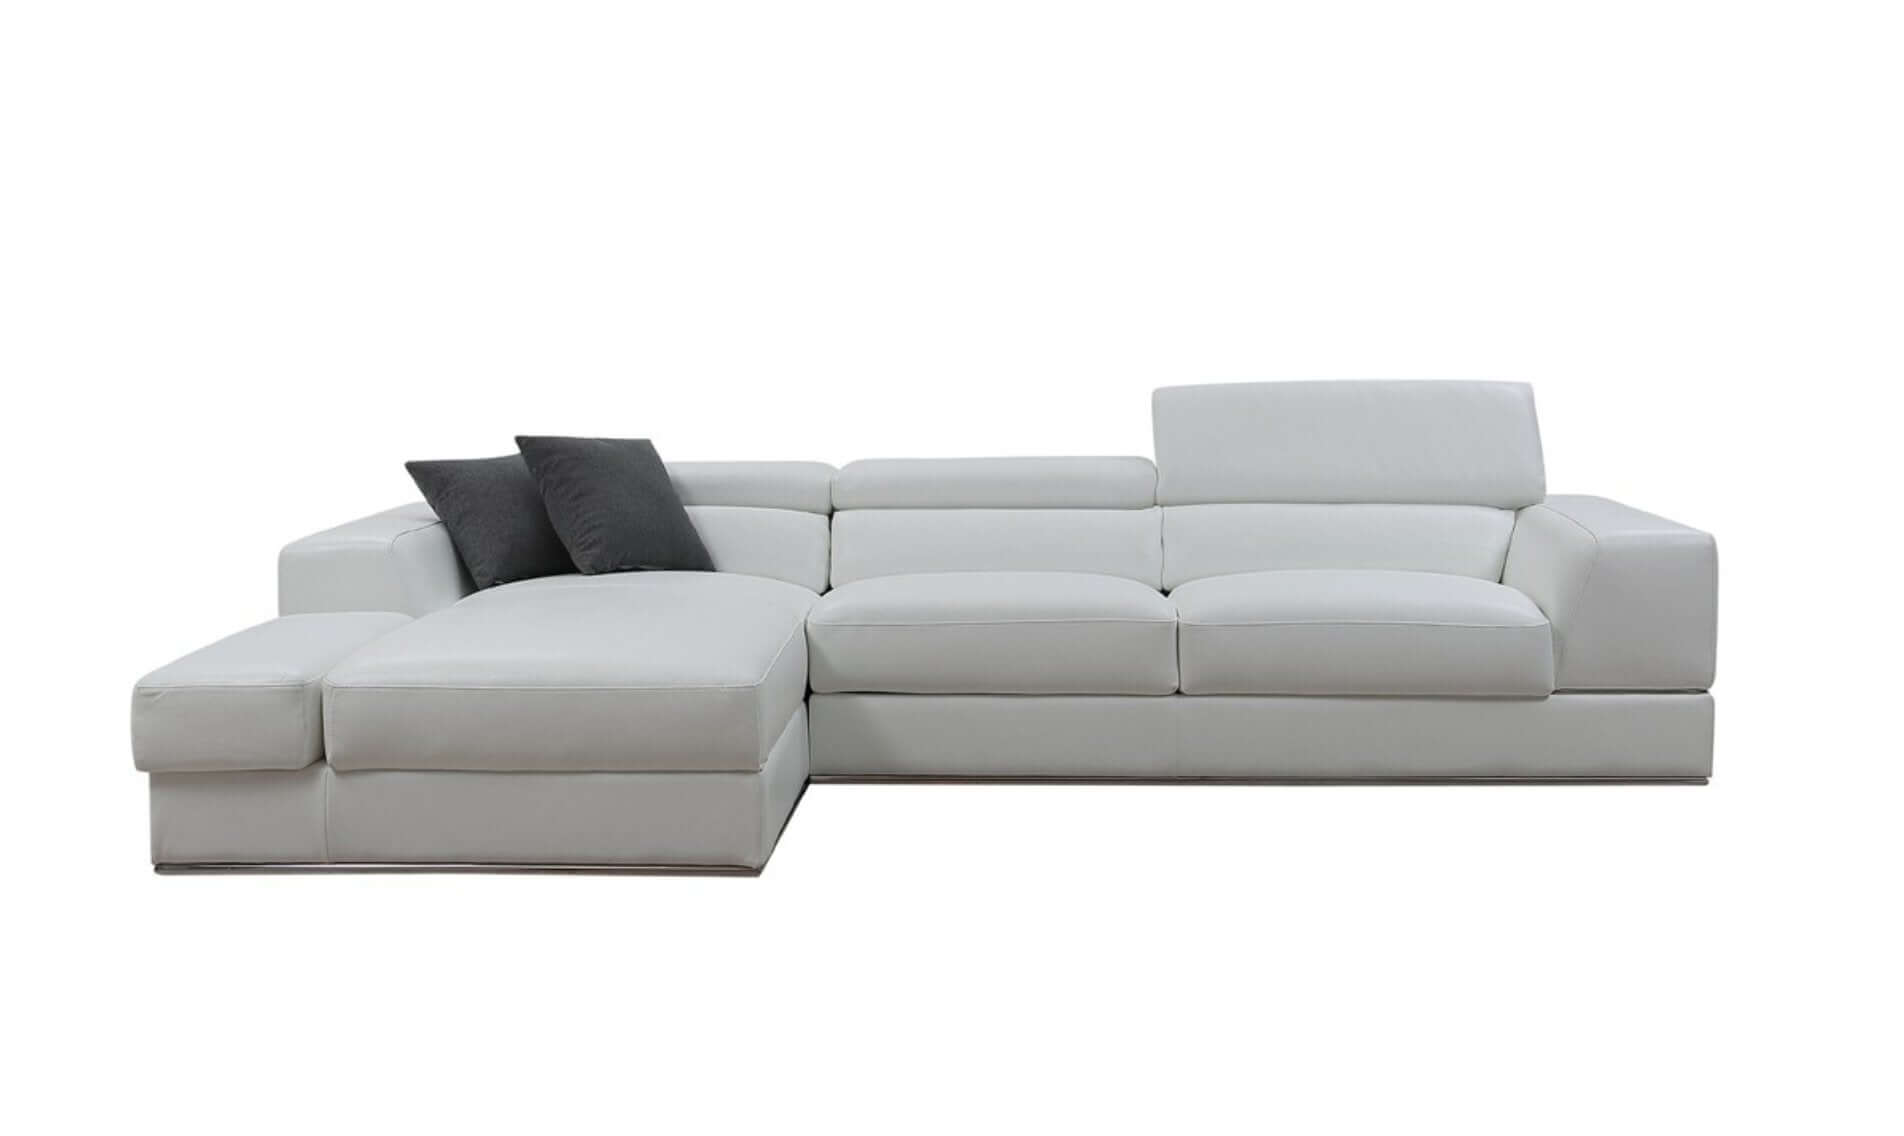 Contemporary White Leather Wide Arm Left Facing Chaise Sectional Sofa 123" - Revel Sofa 